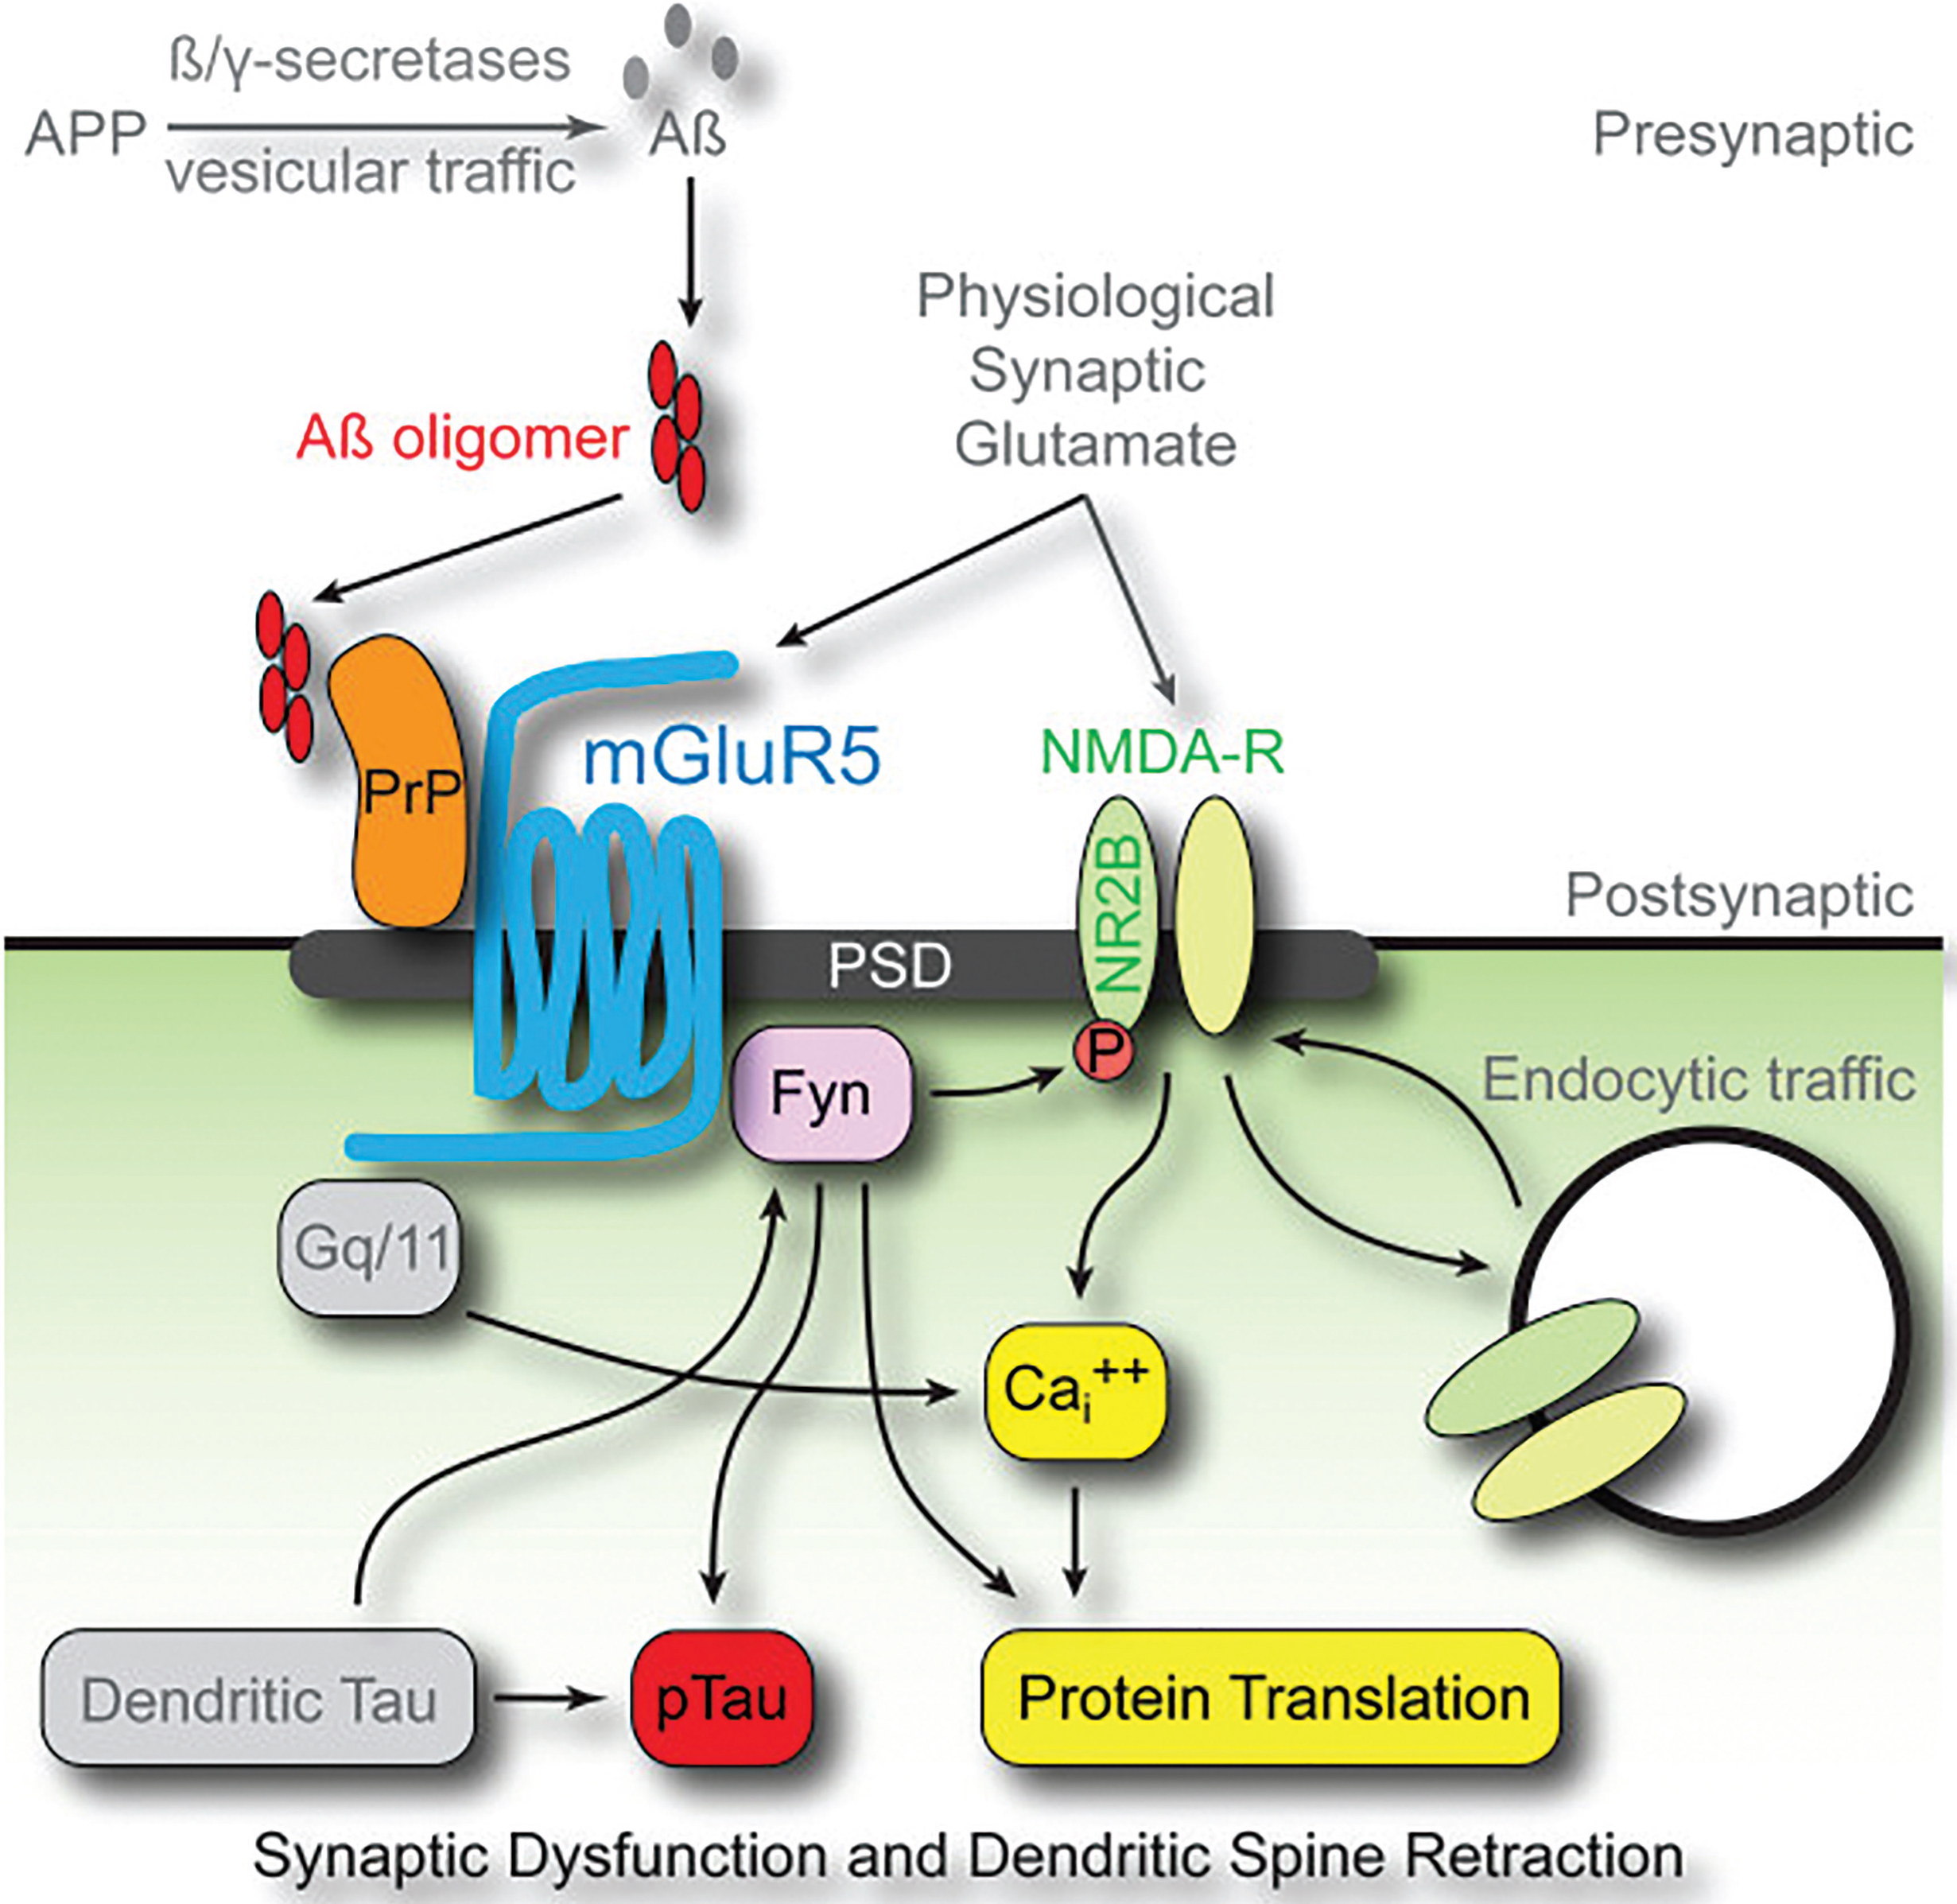 PrPc mediates AβO toxicity through mGluR5, Fyn kinase, and NMDARs. Downstream consequences of the pathway include calcium dyshomeostasis, tau hyperphosphorylation, and synaptic dysfunction and loss. Reprinted from “Fyn kinase inhibition as a novel therapy for Alzheimer’s disease” by Nygaard HB, van Dyck CH, and Strittmater SM. This was published in Alzheimers Res Ther, 2014, 6(1): 8, under the terms of the Creative Commons Attribution License (CC BY) [227].
